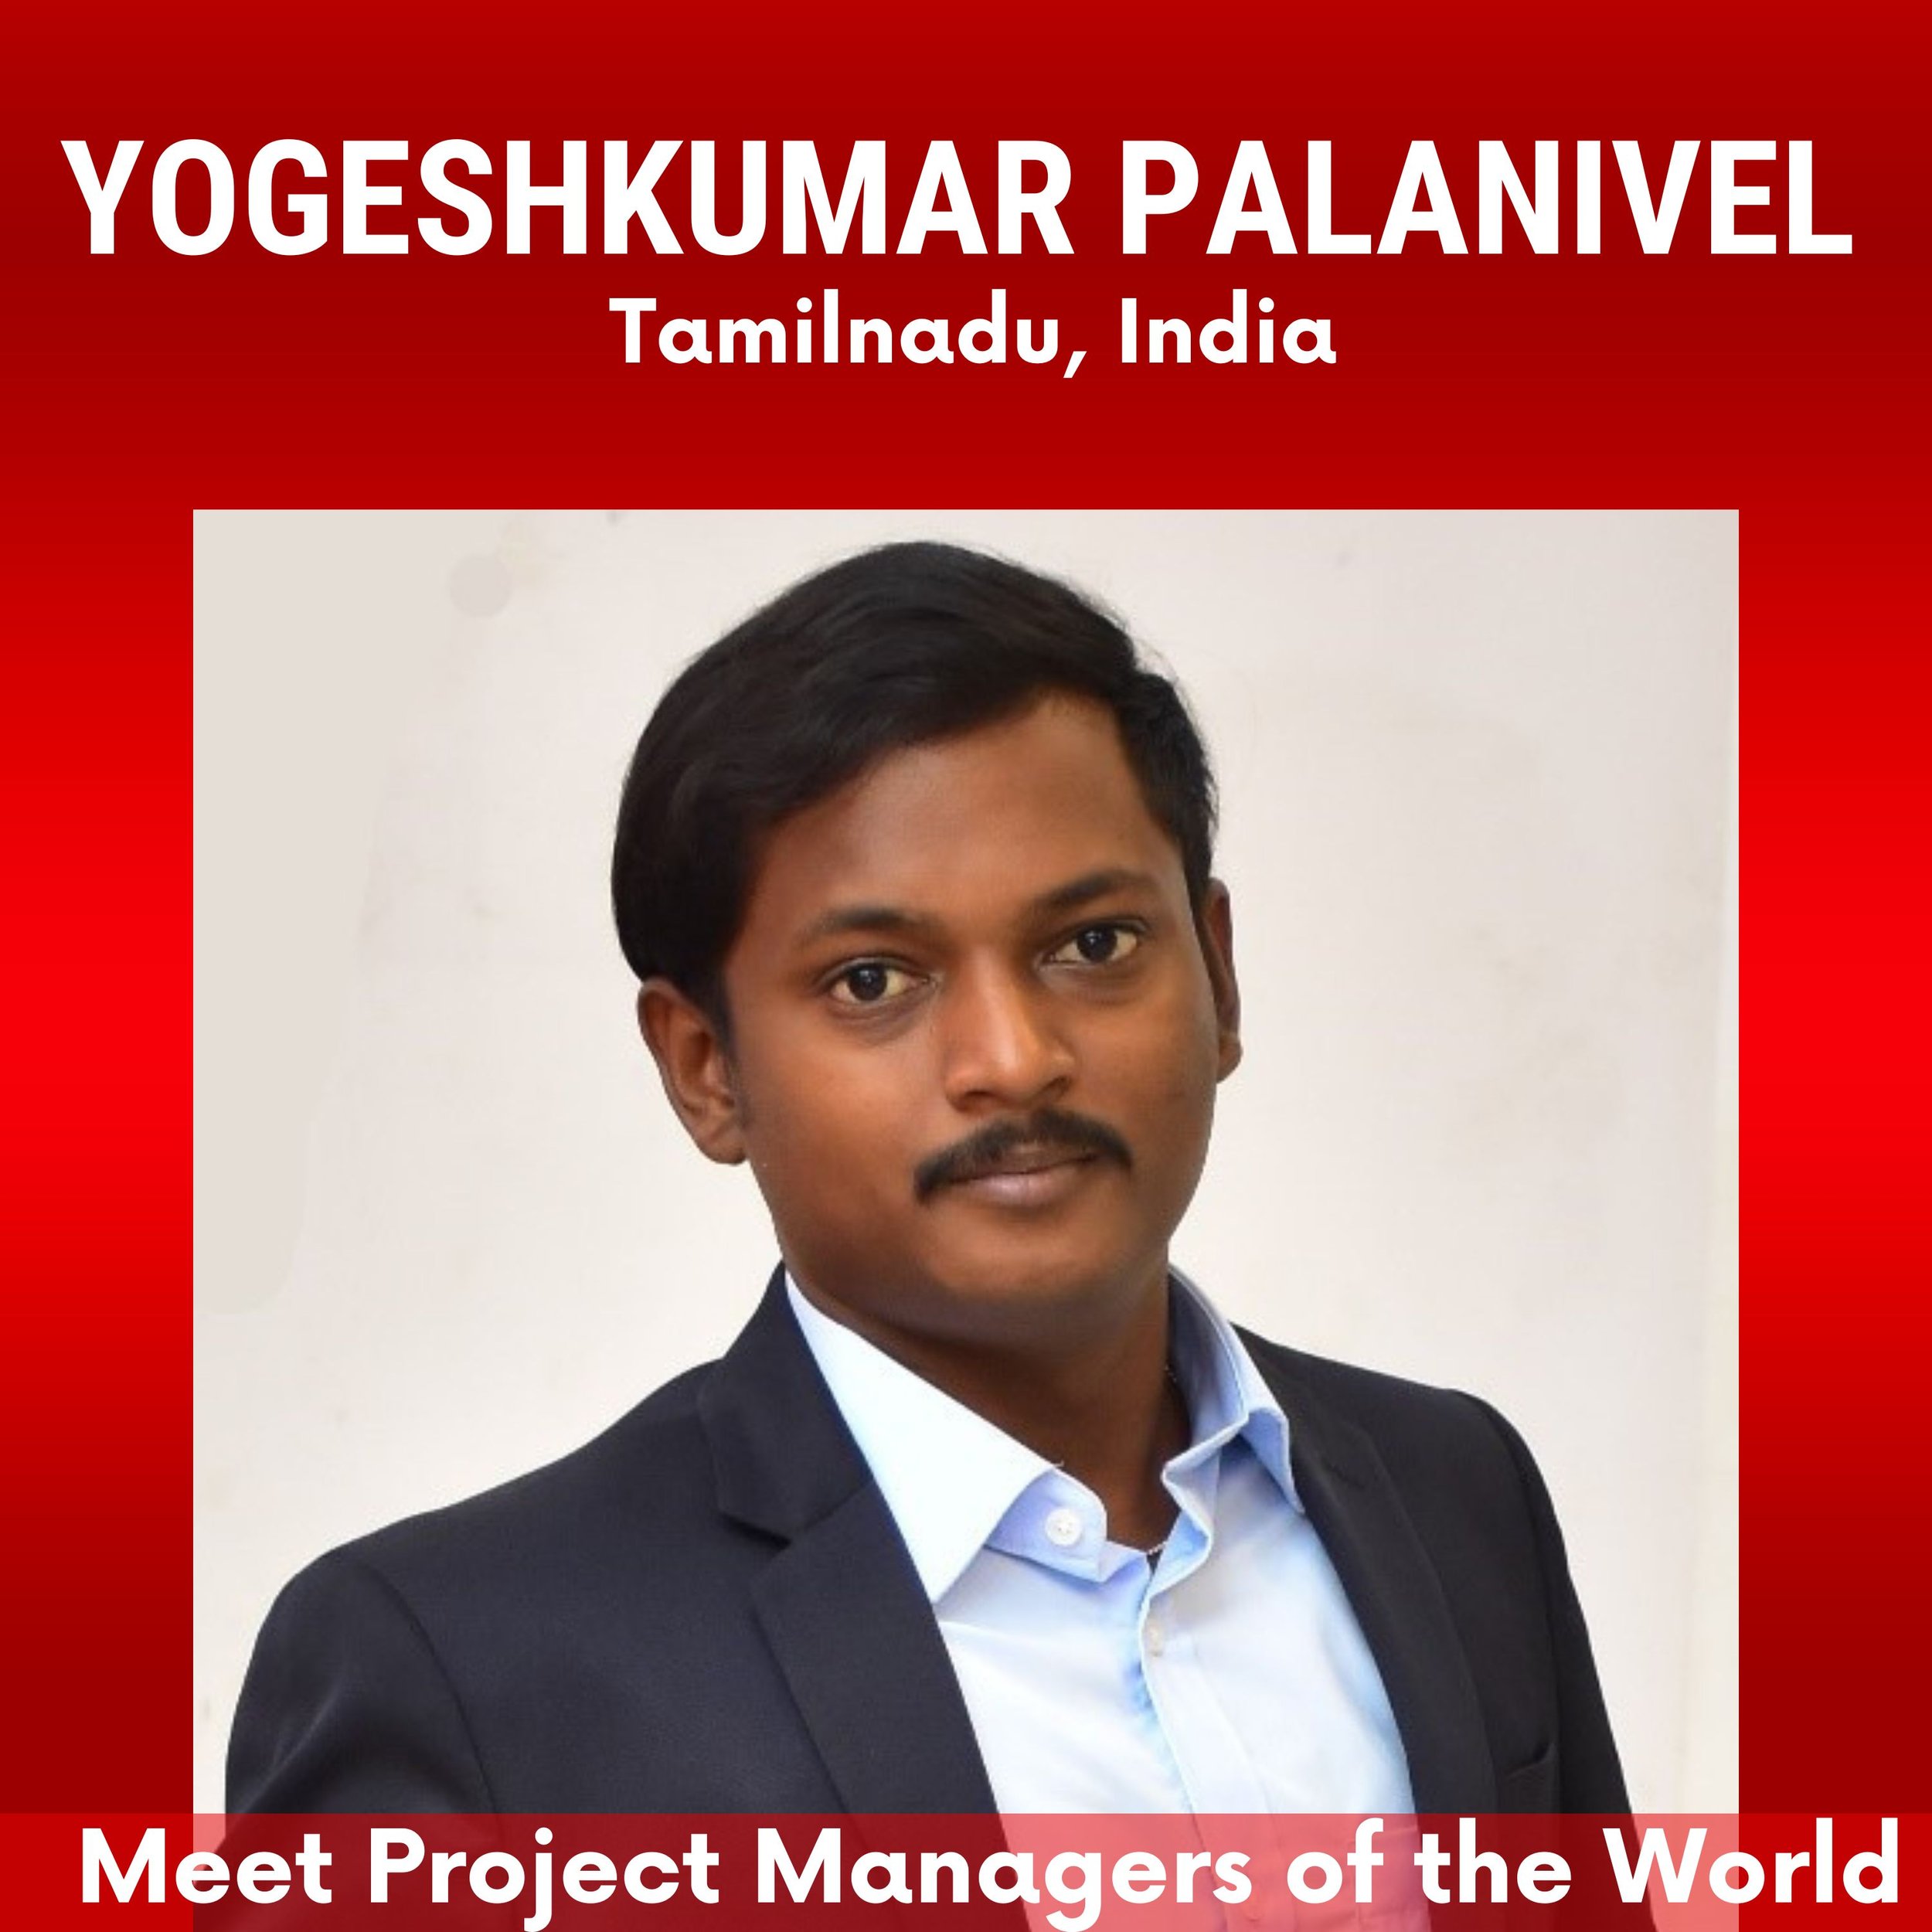 Projects created by Yogesh Kumar